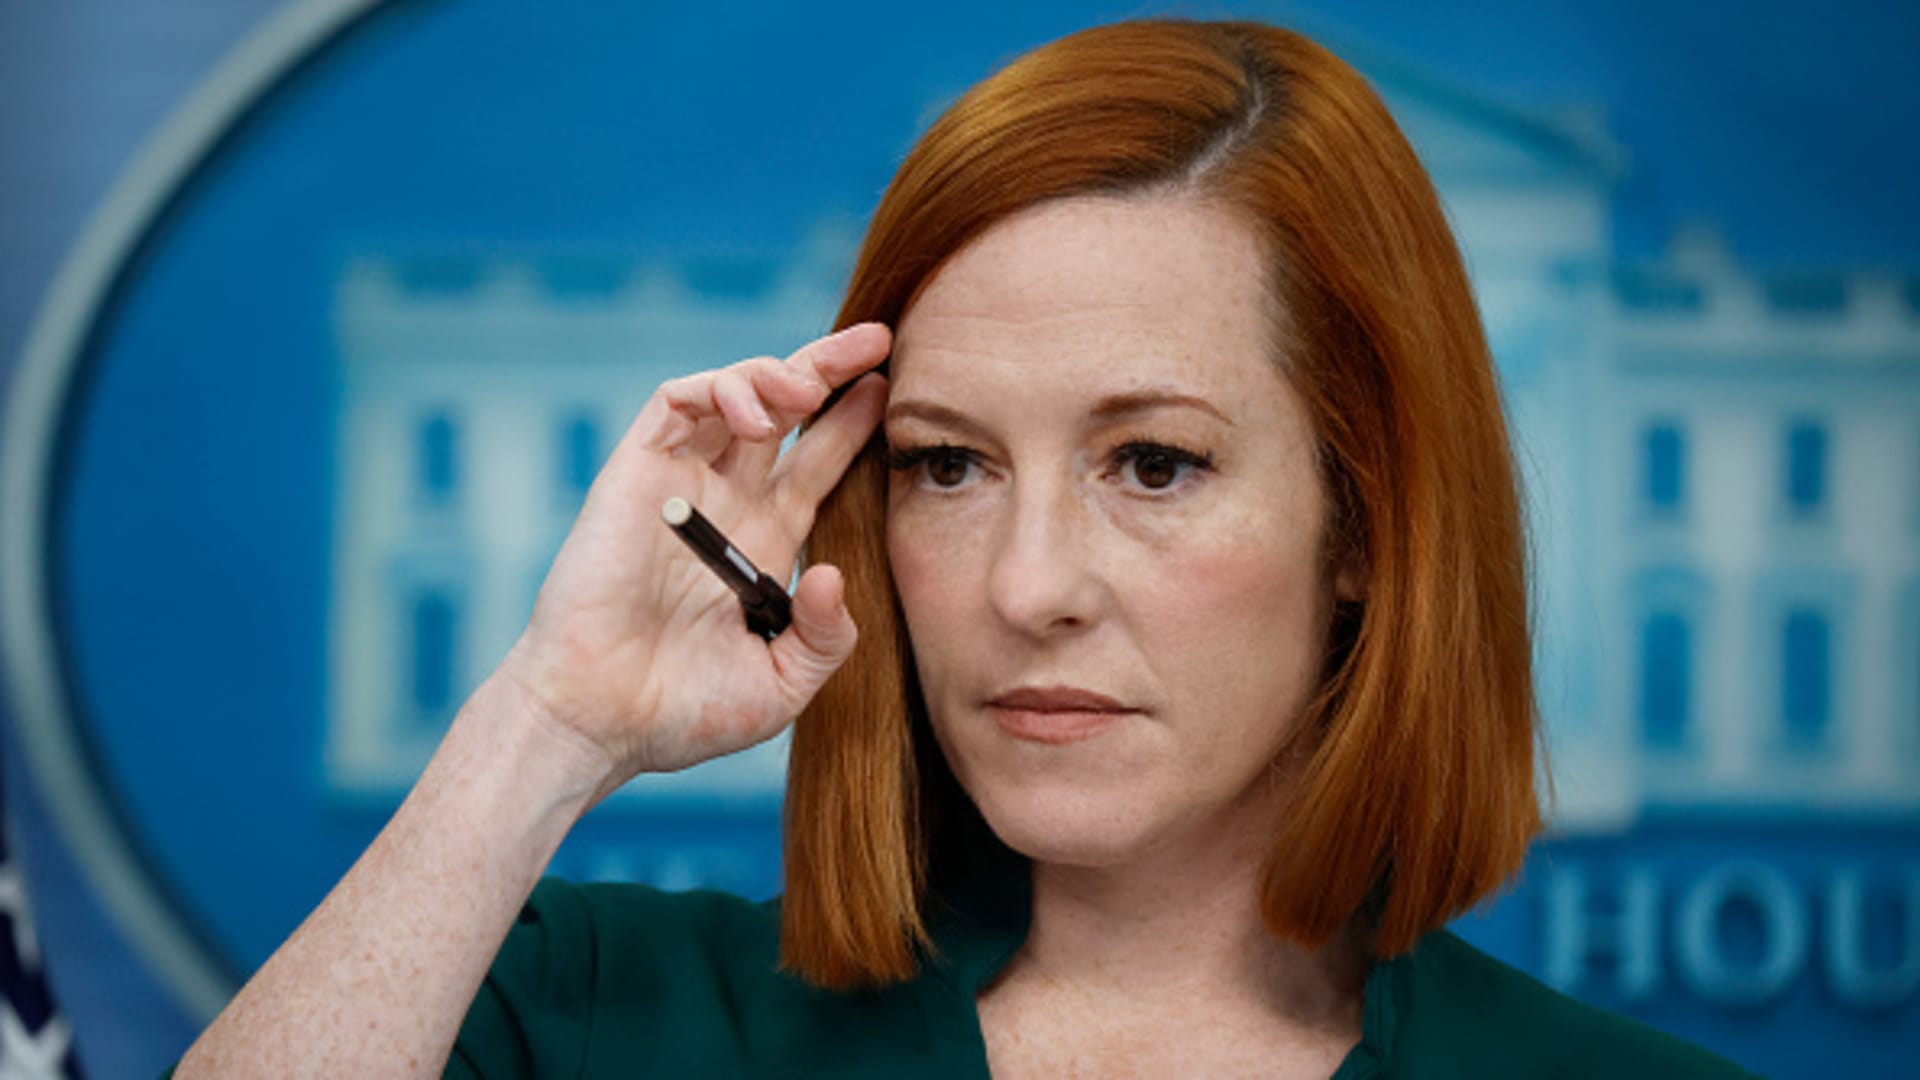 White House Press Secretary Jen Psaki talks to reporters in the Brady Press Briefing Room at the White House on March 10, 2022 in Washington, DC.